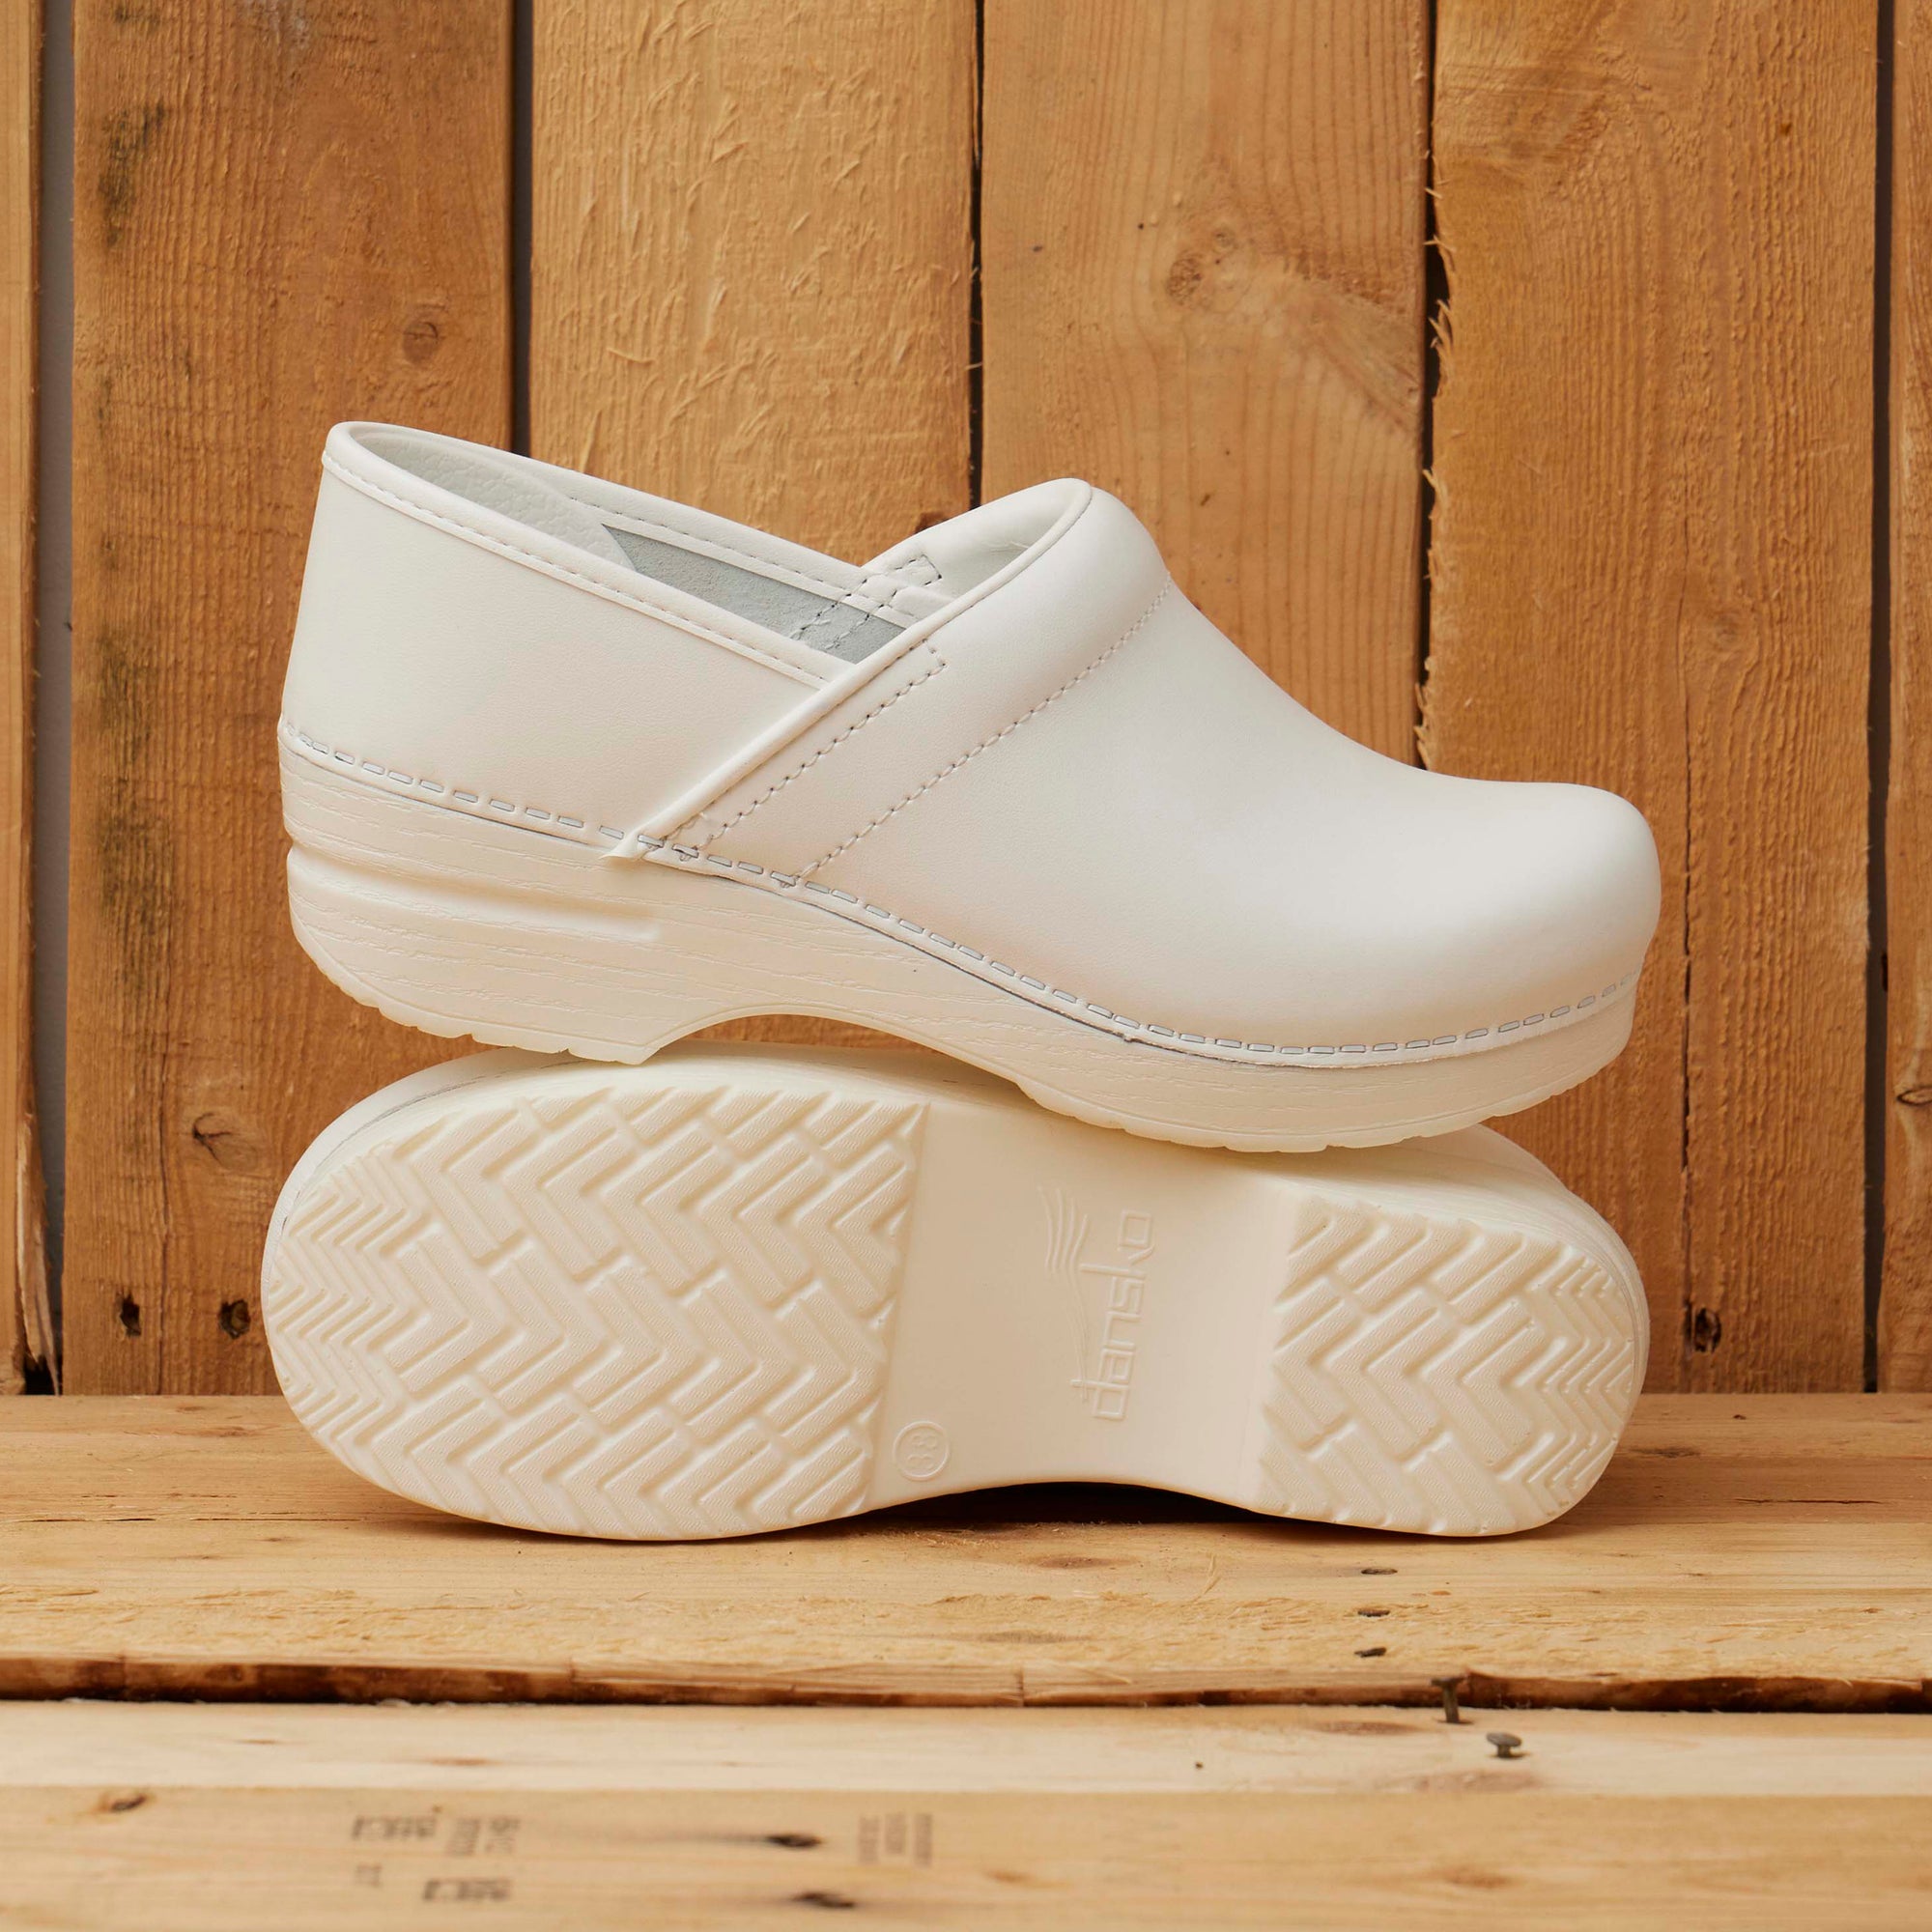 Traditional white clogs shown in front of a wood background.